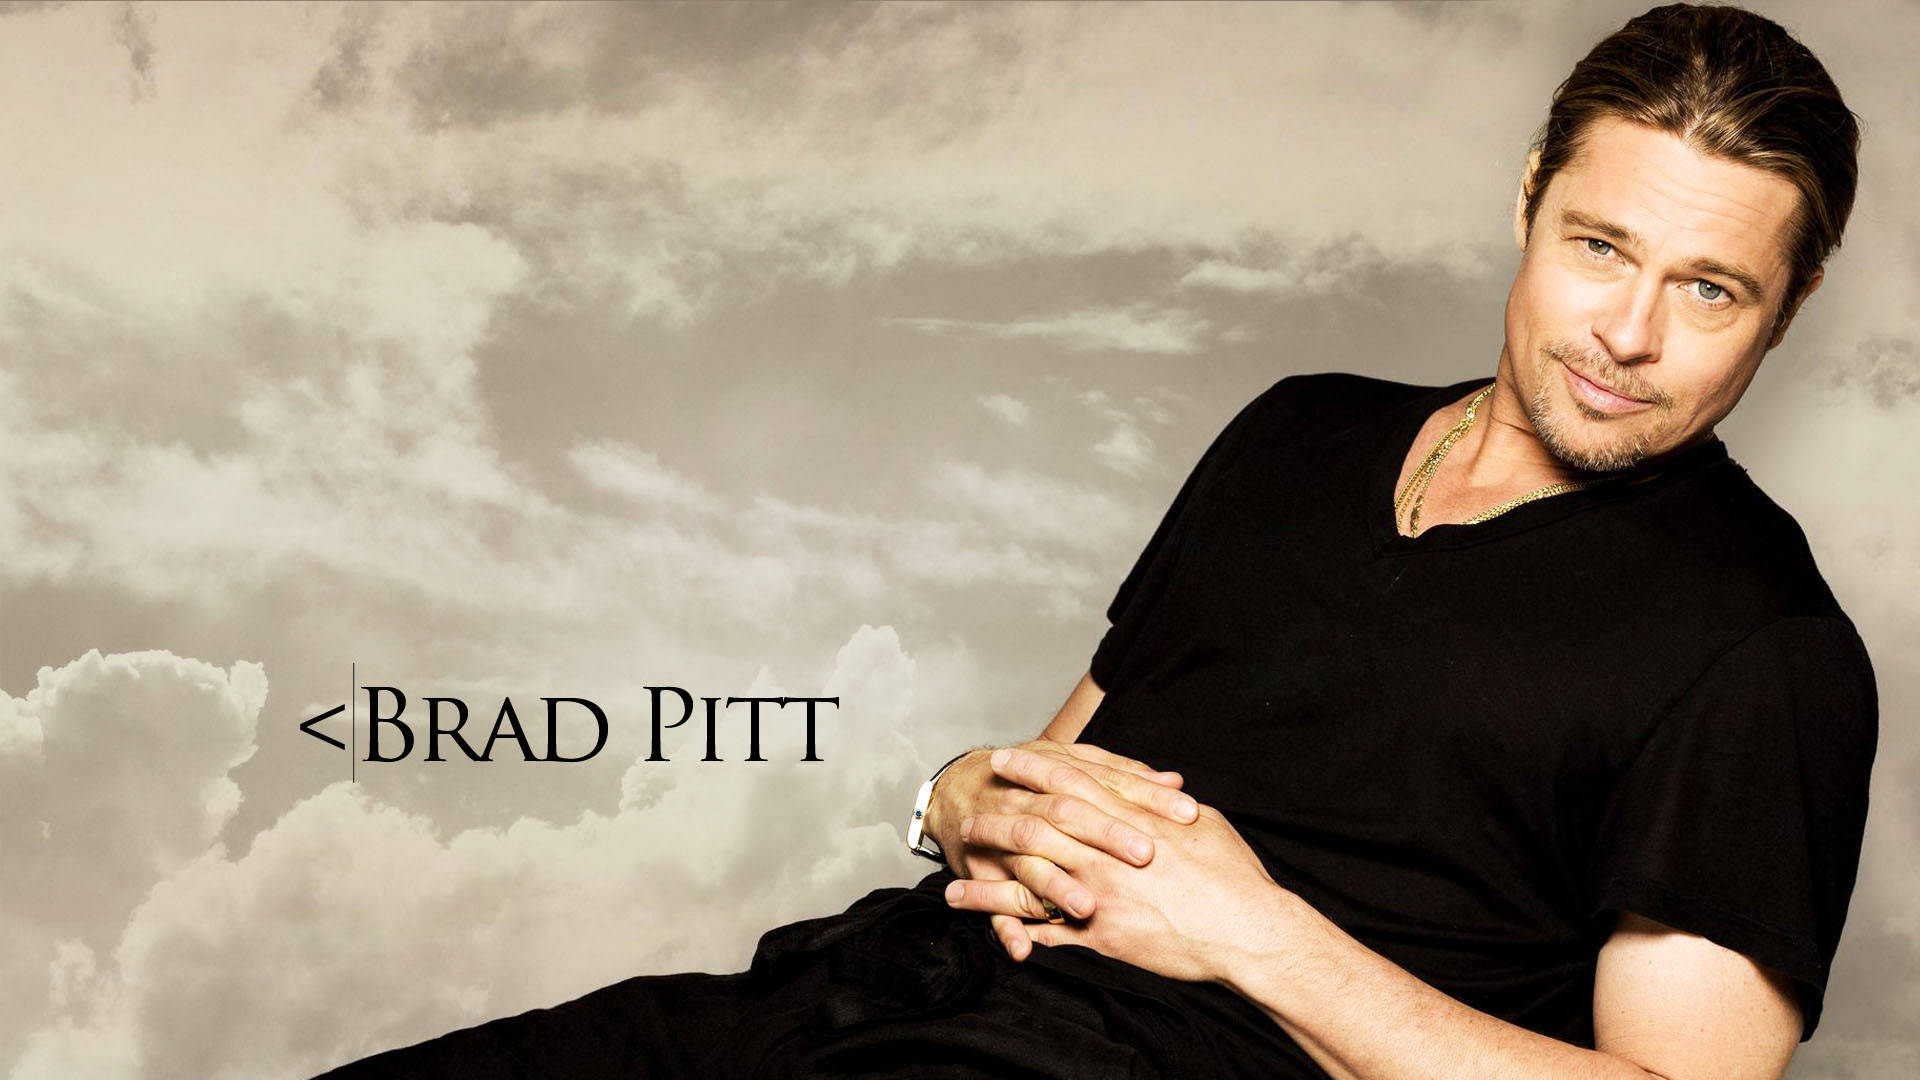 Brad Pitt Soars Above The Clouds! Background